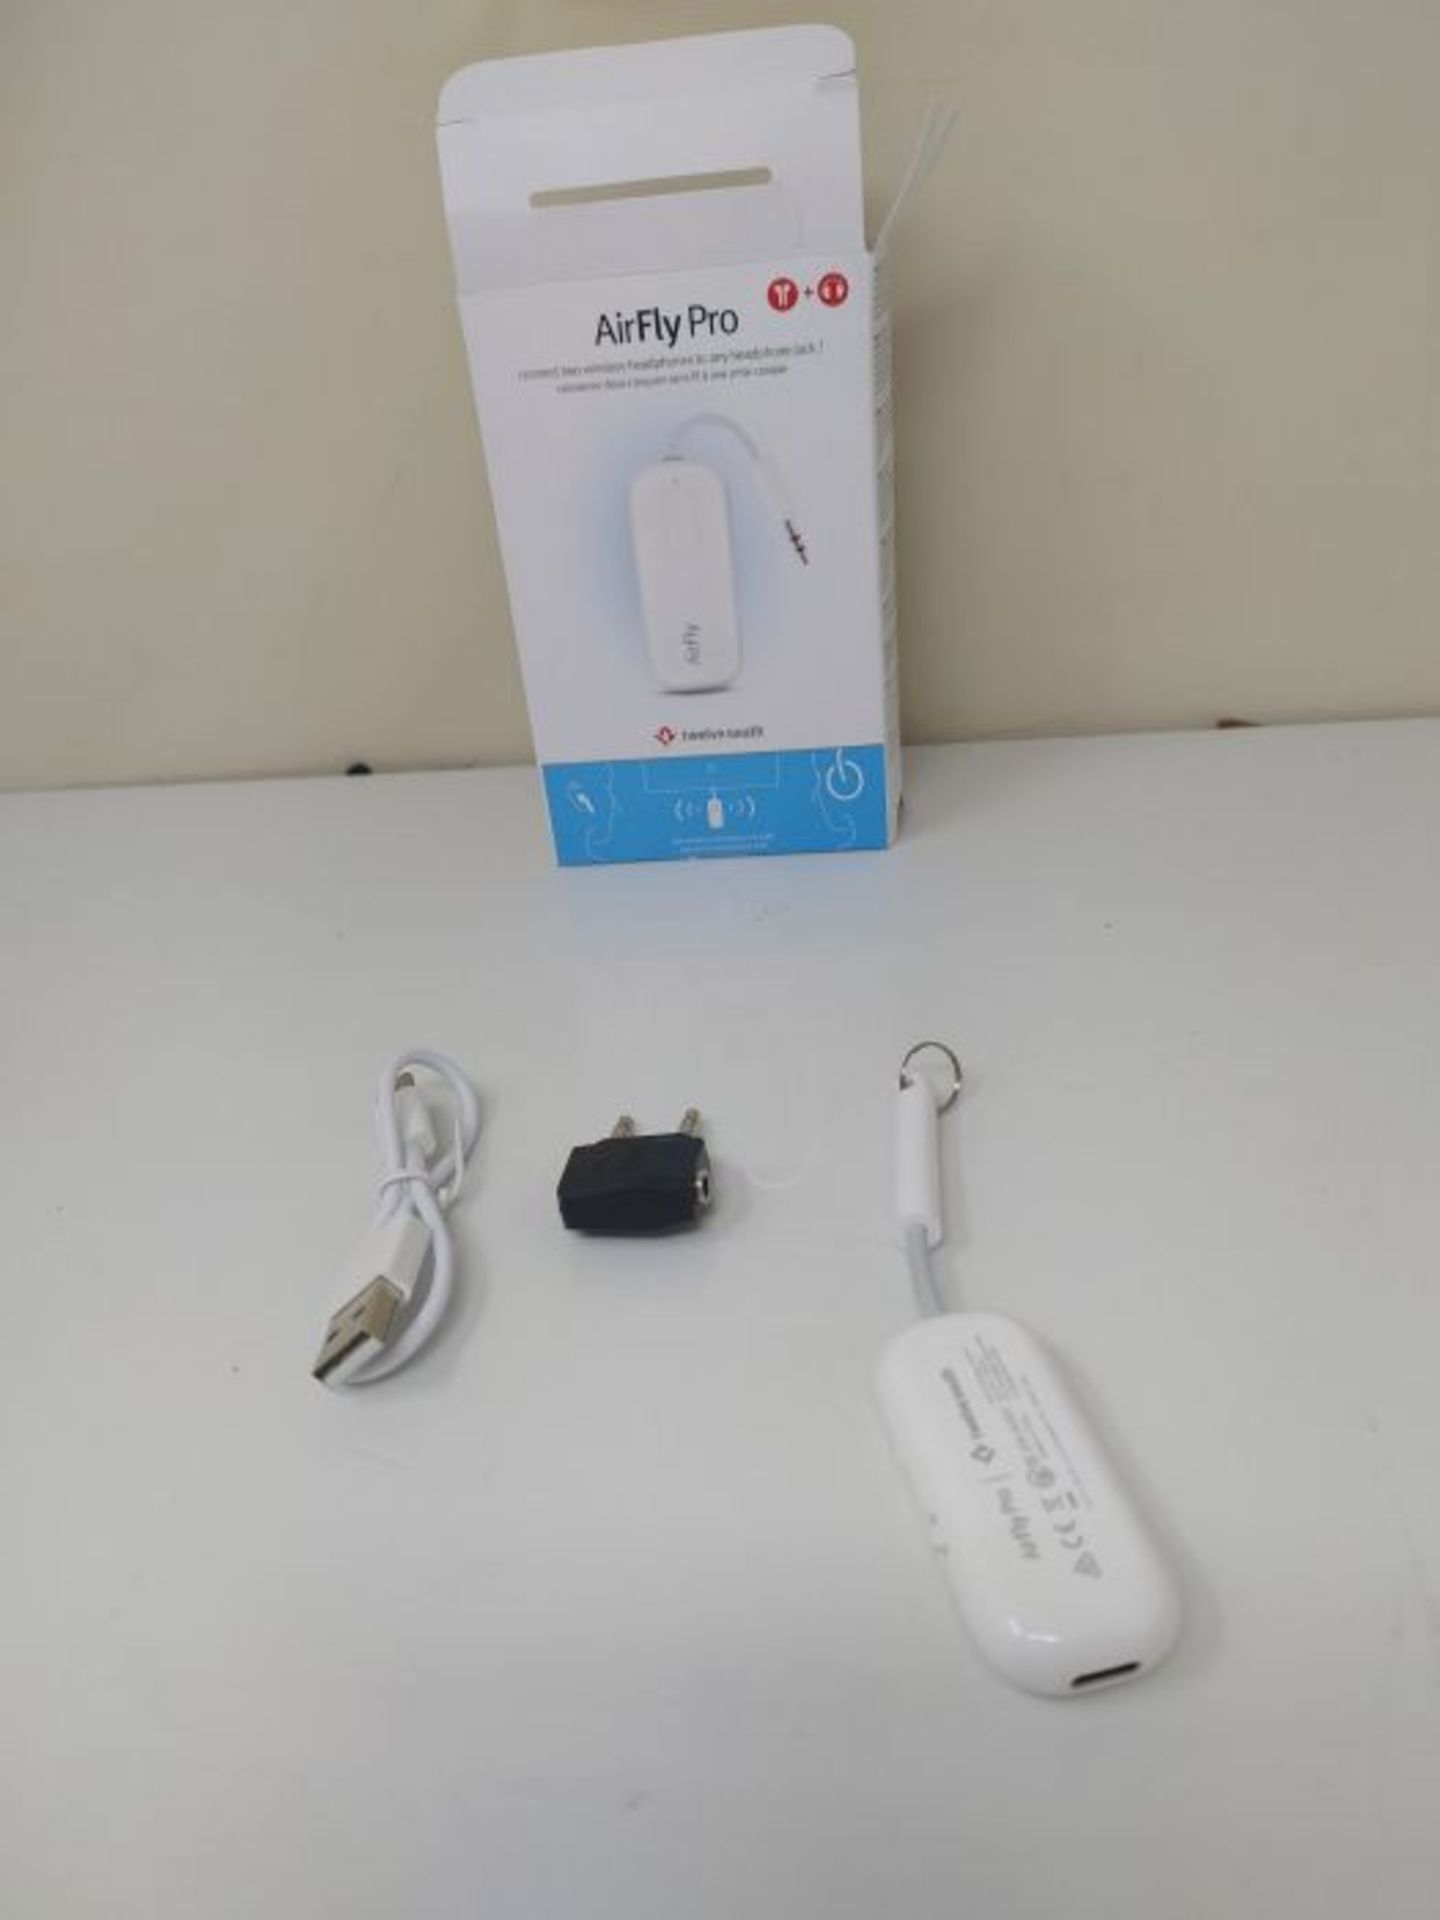 Twelve South AirFly Pro | Wireless Transmitter/Receiver with Audio Sharing for Up to 2 - Image 2 of 2